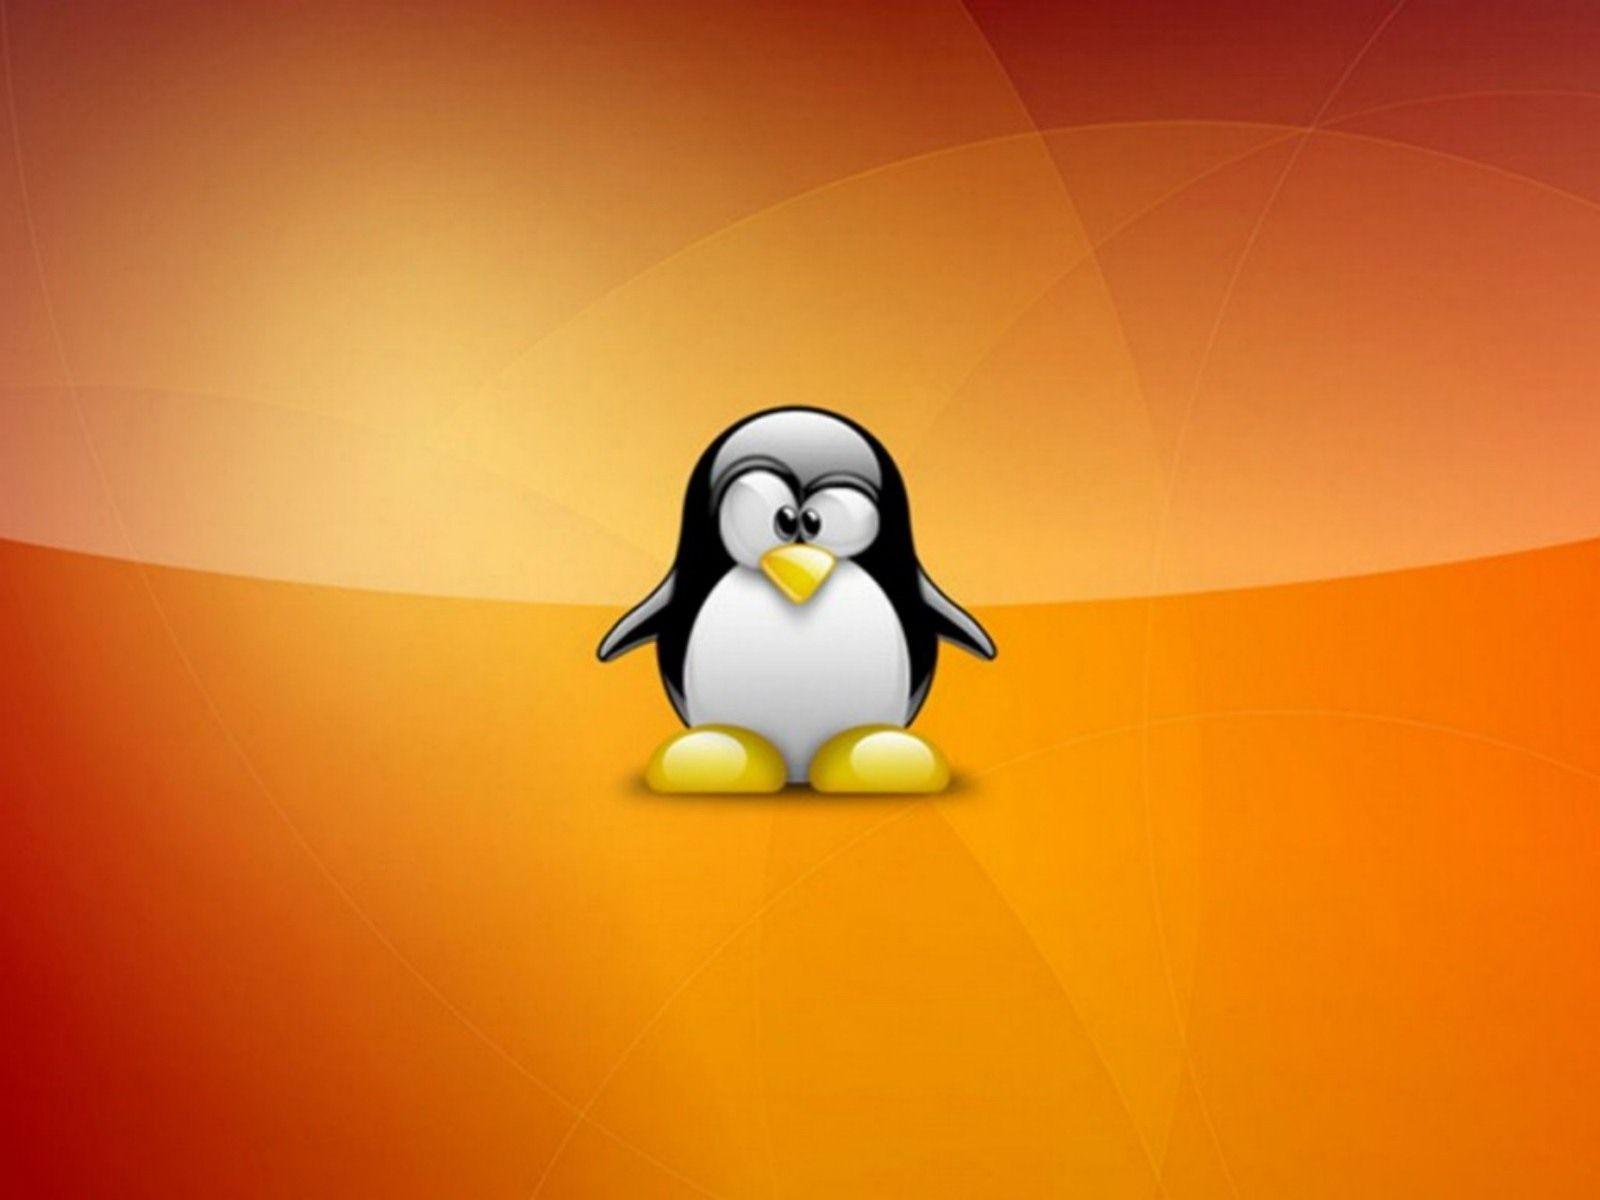 Super Tux Wallpaper Linux We Can Be Happy Alone